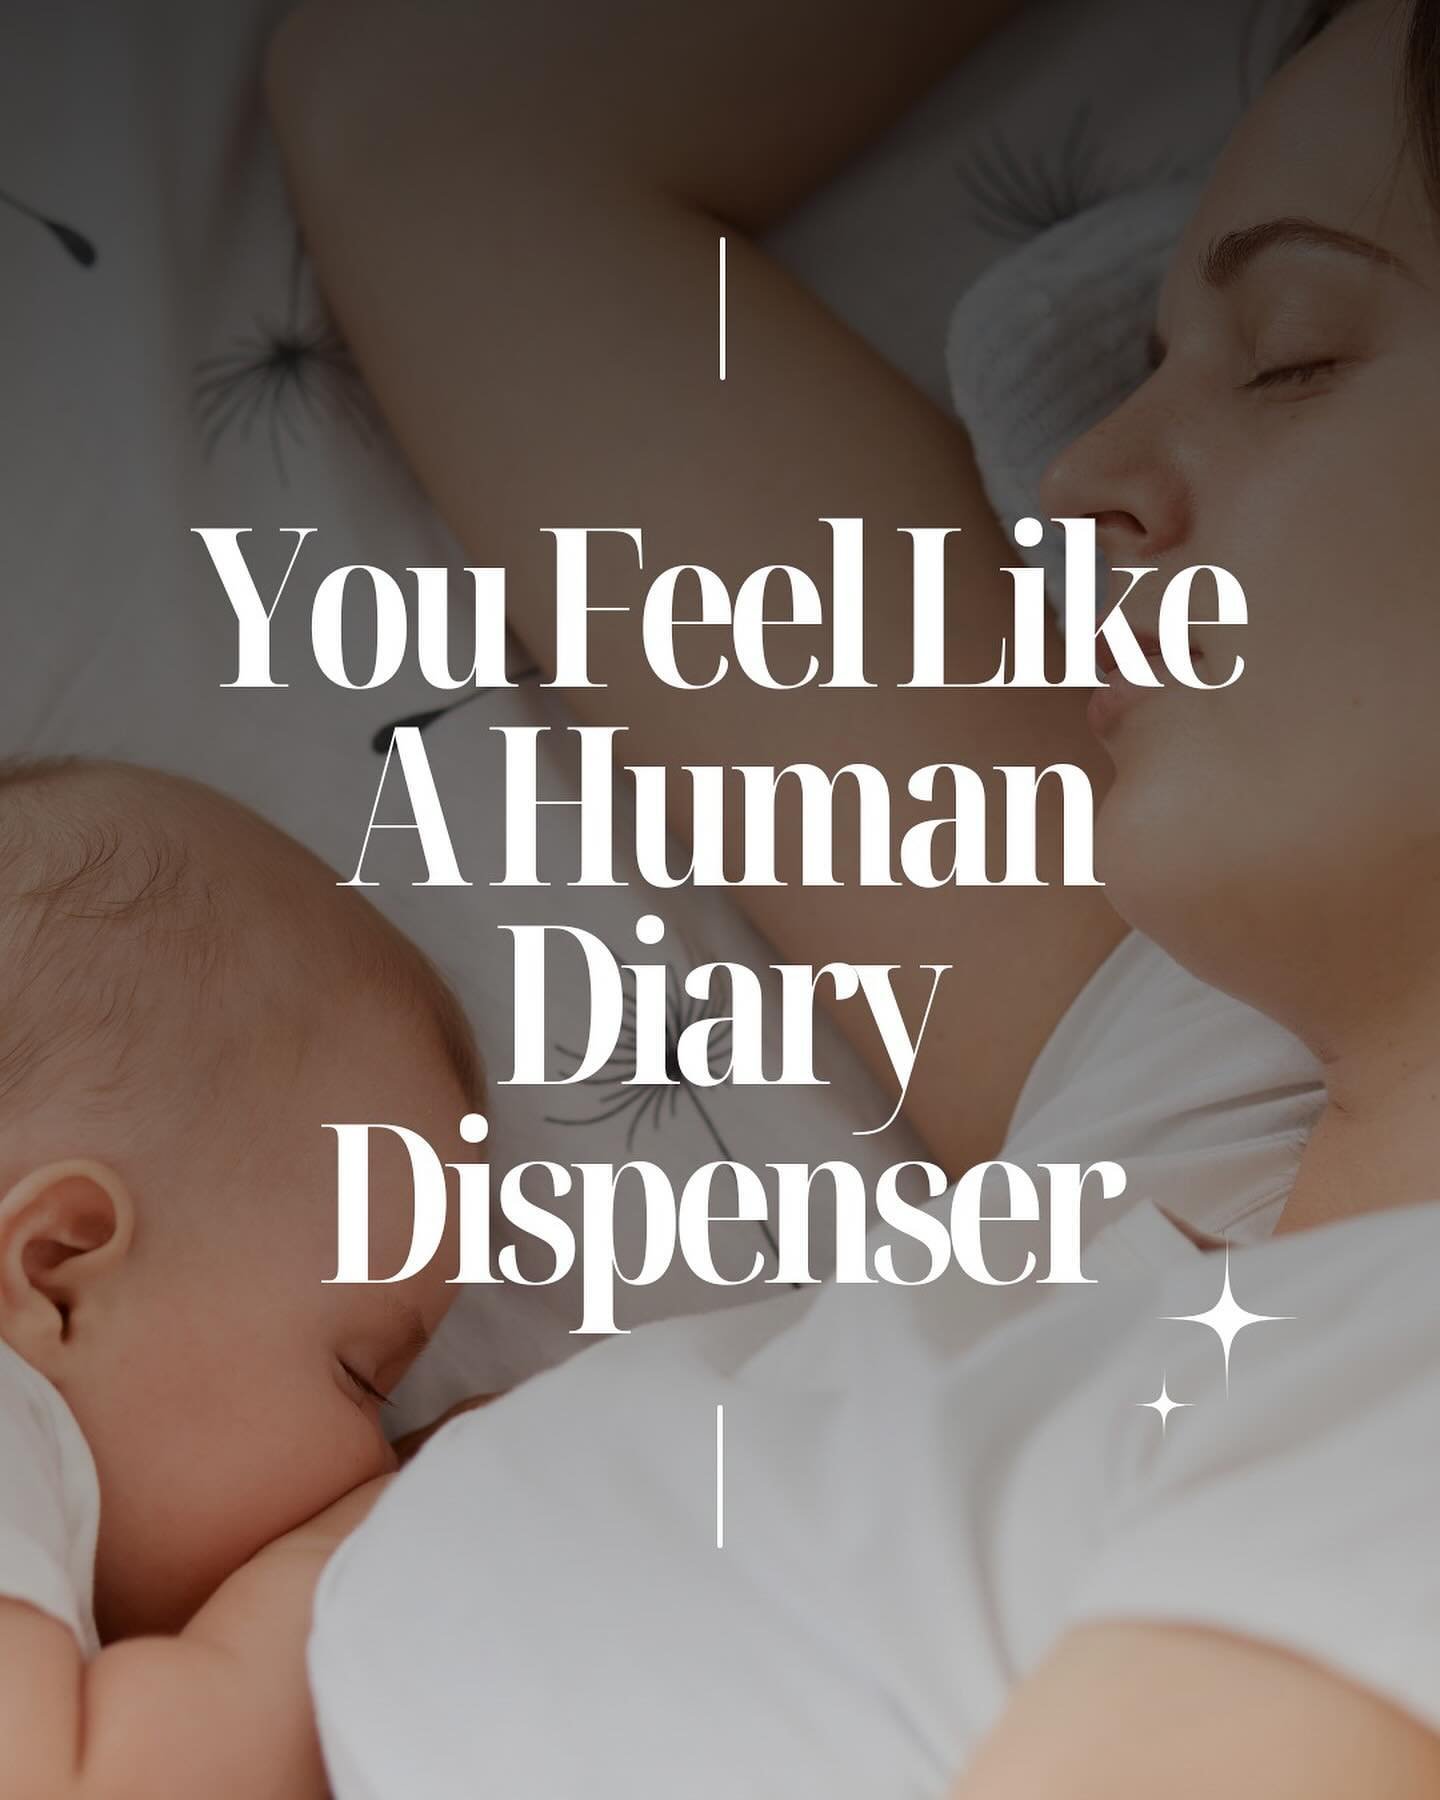 I&rsquo;m not about to tell you to ditch the night feeds altogether - we know our babies may still need night feeds, especially in the newborn stage.

But every time your baby wakes up does not does not mean they need to feed at this time.

Babies wa